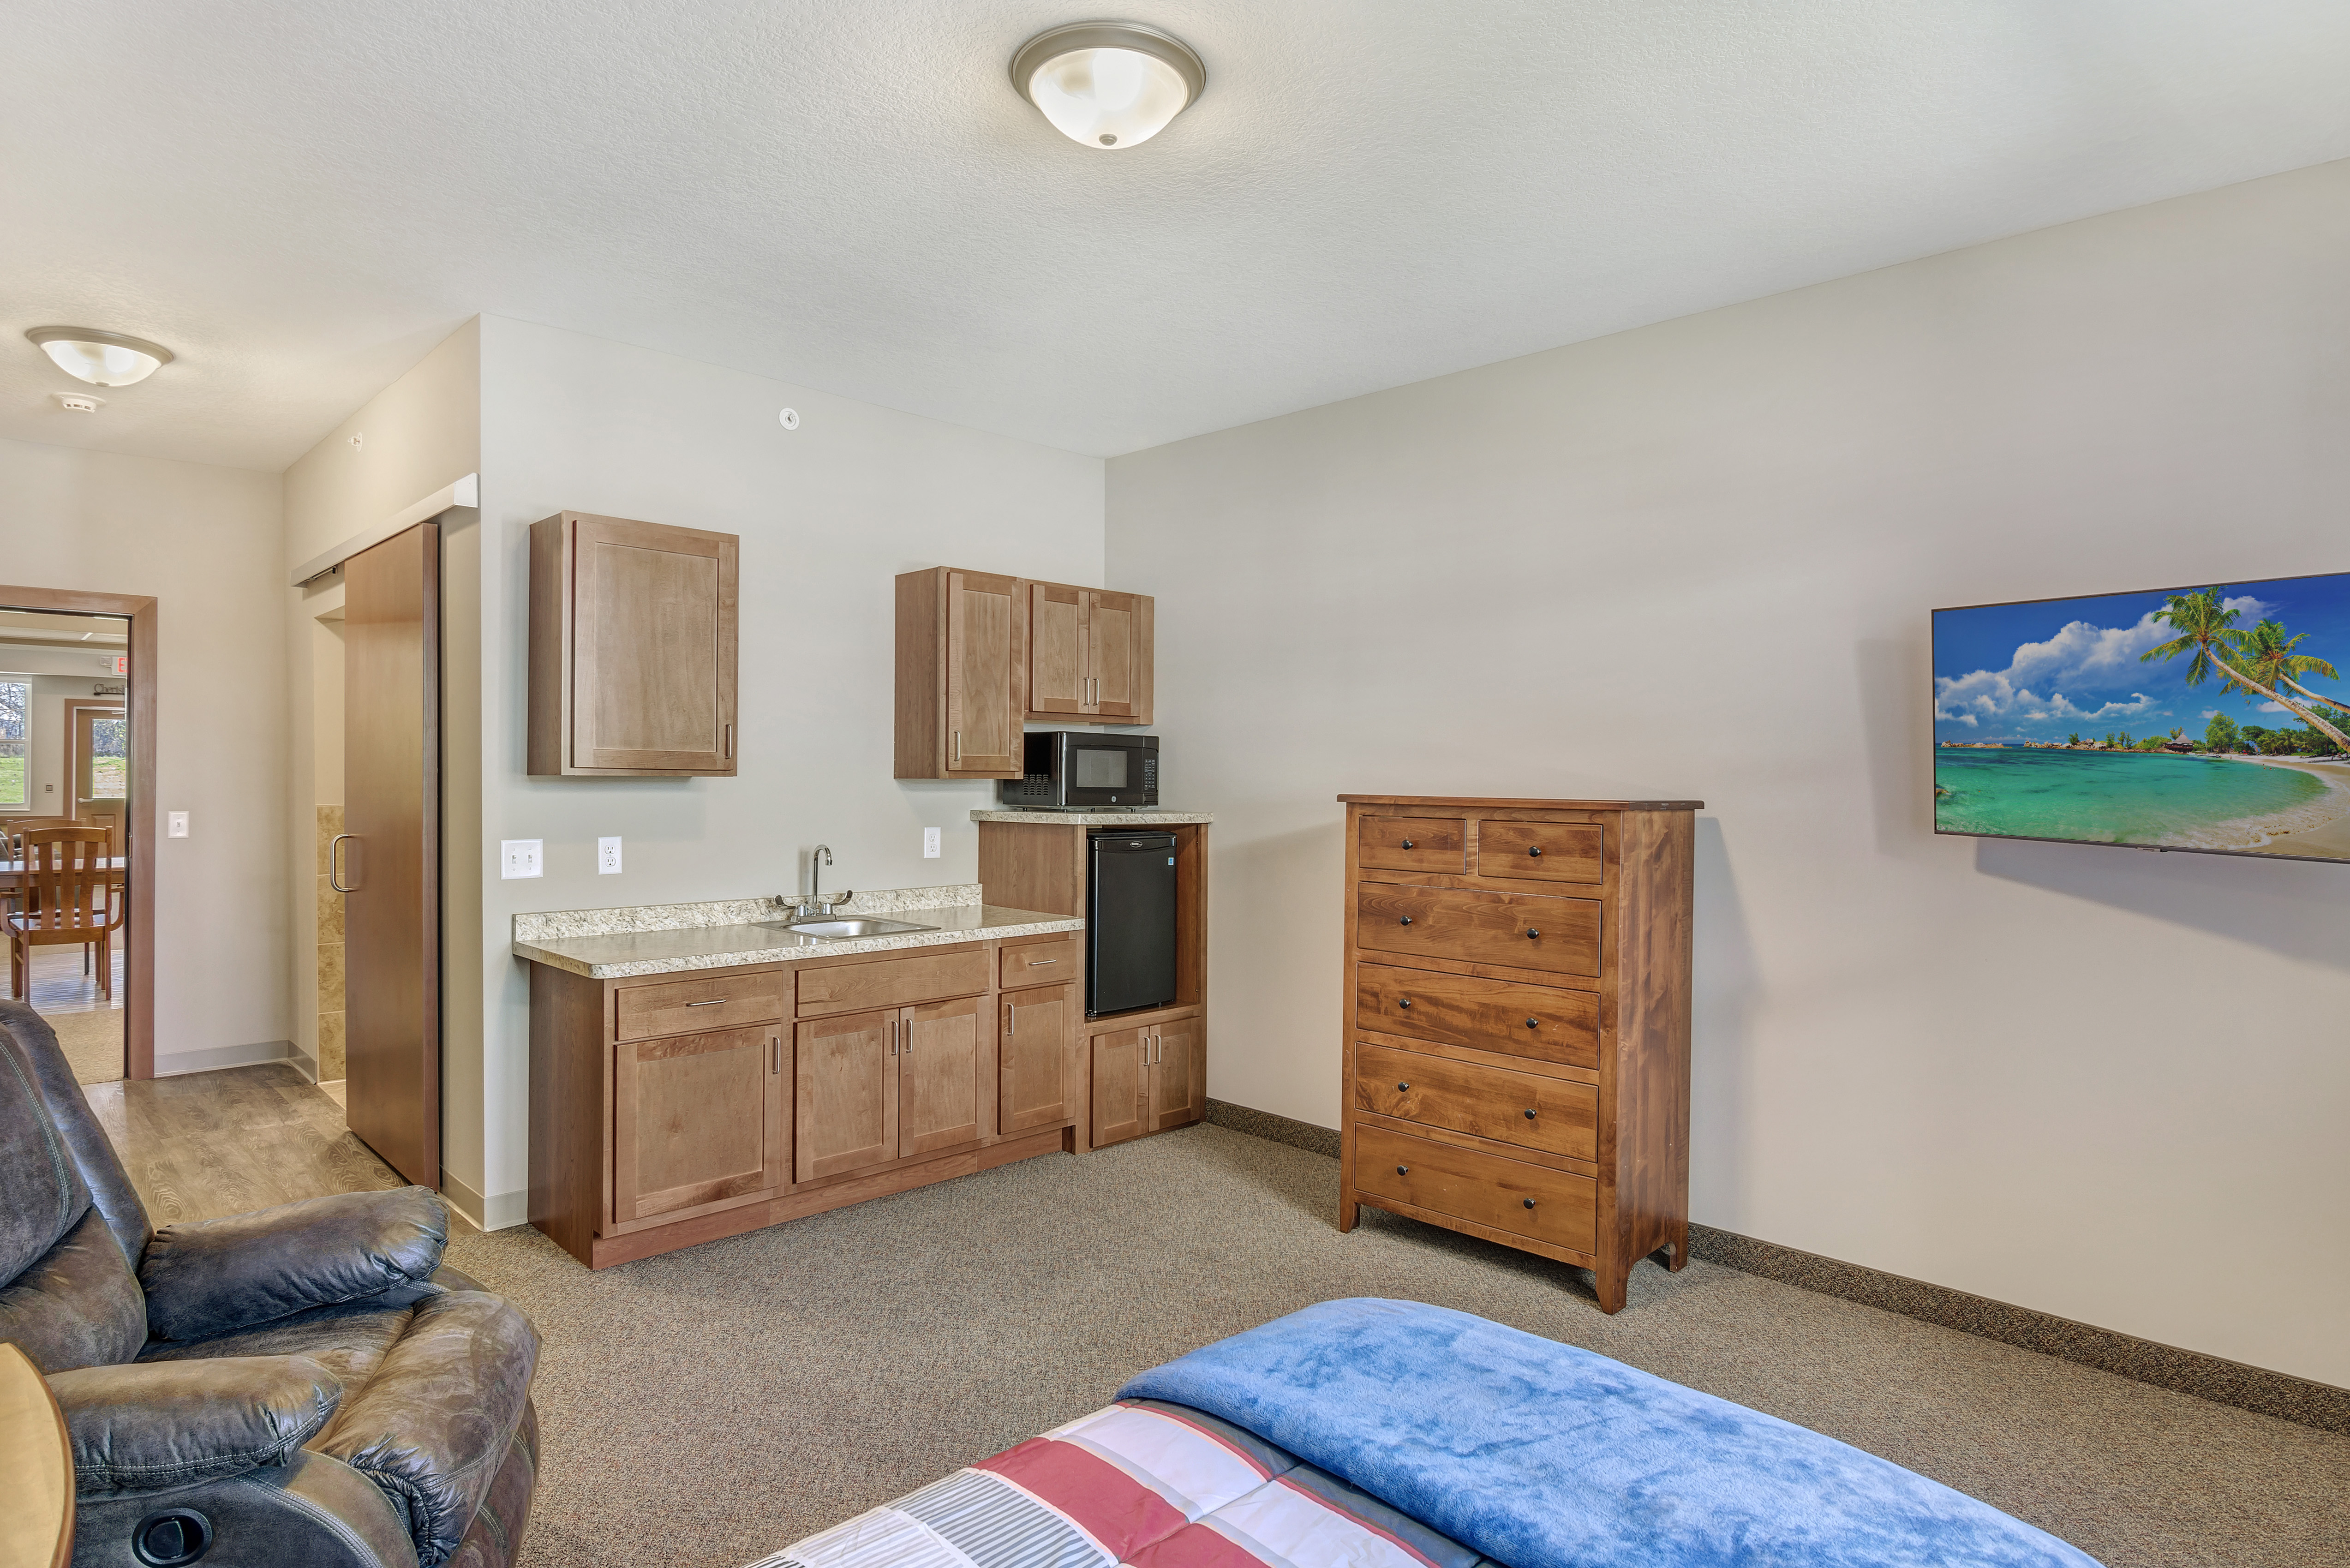 Suite Living of Prior Lake image